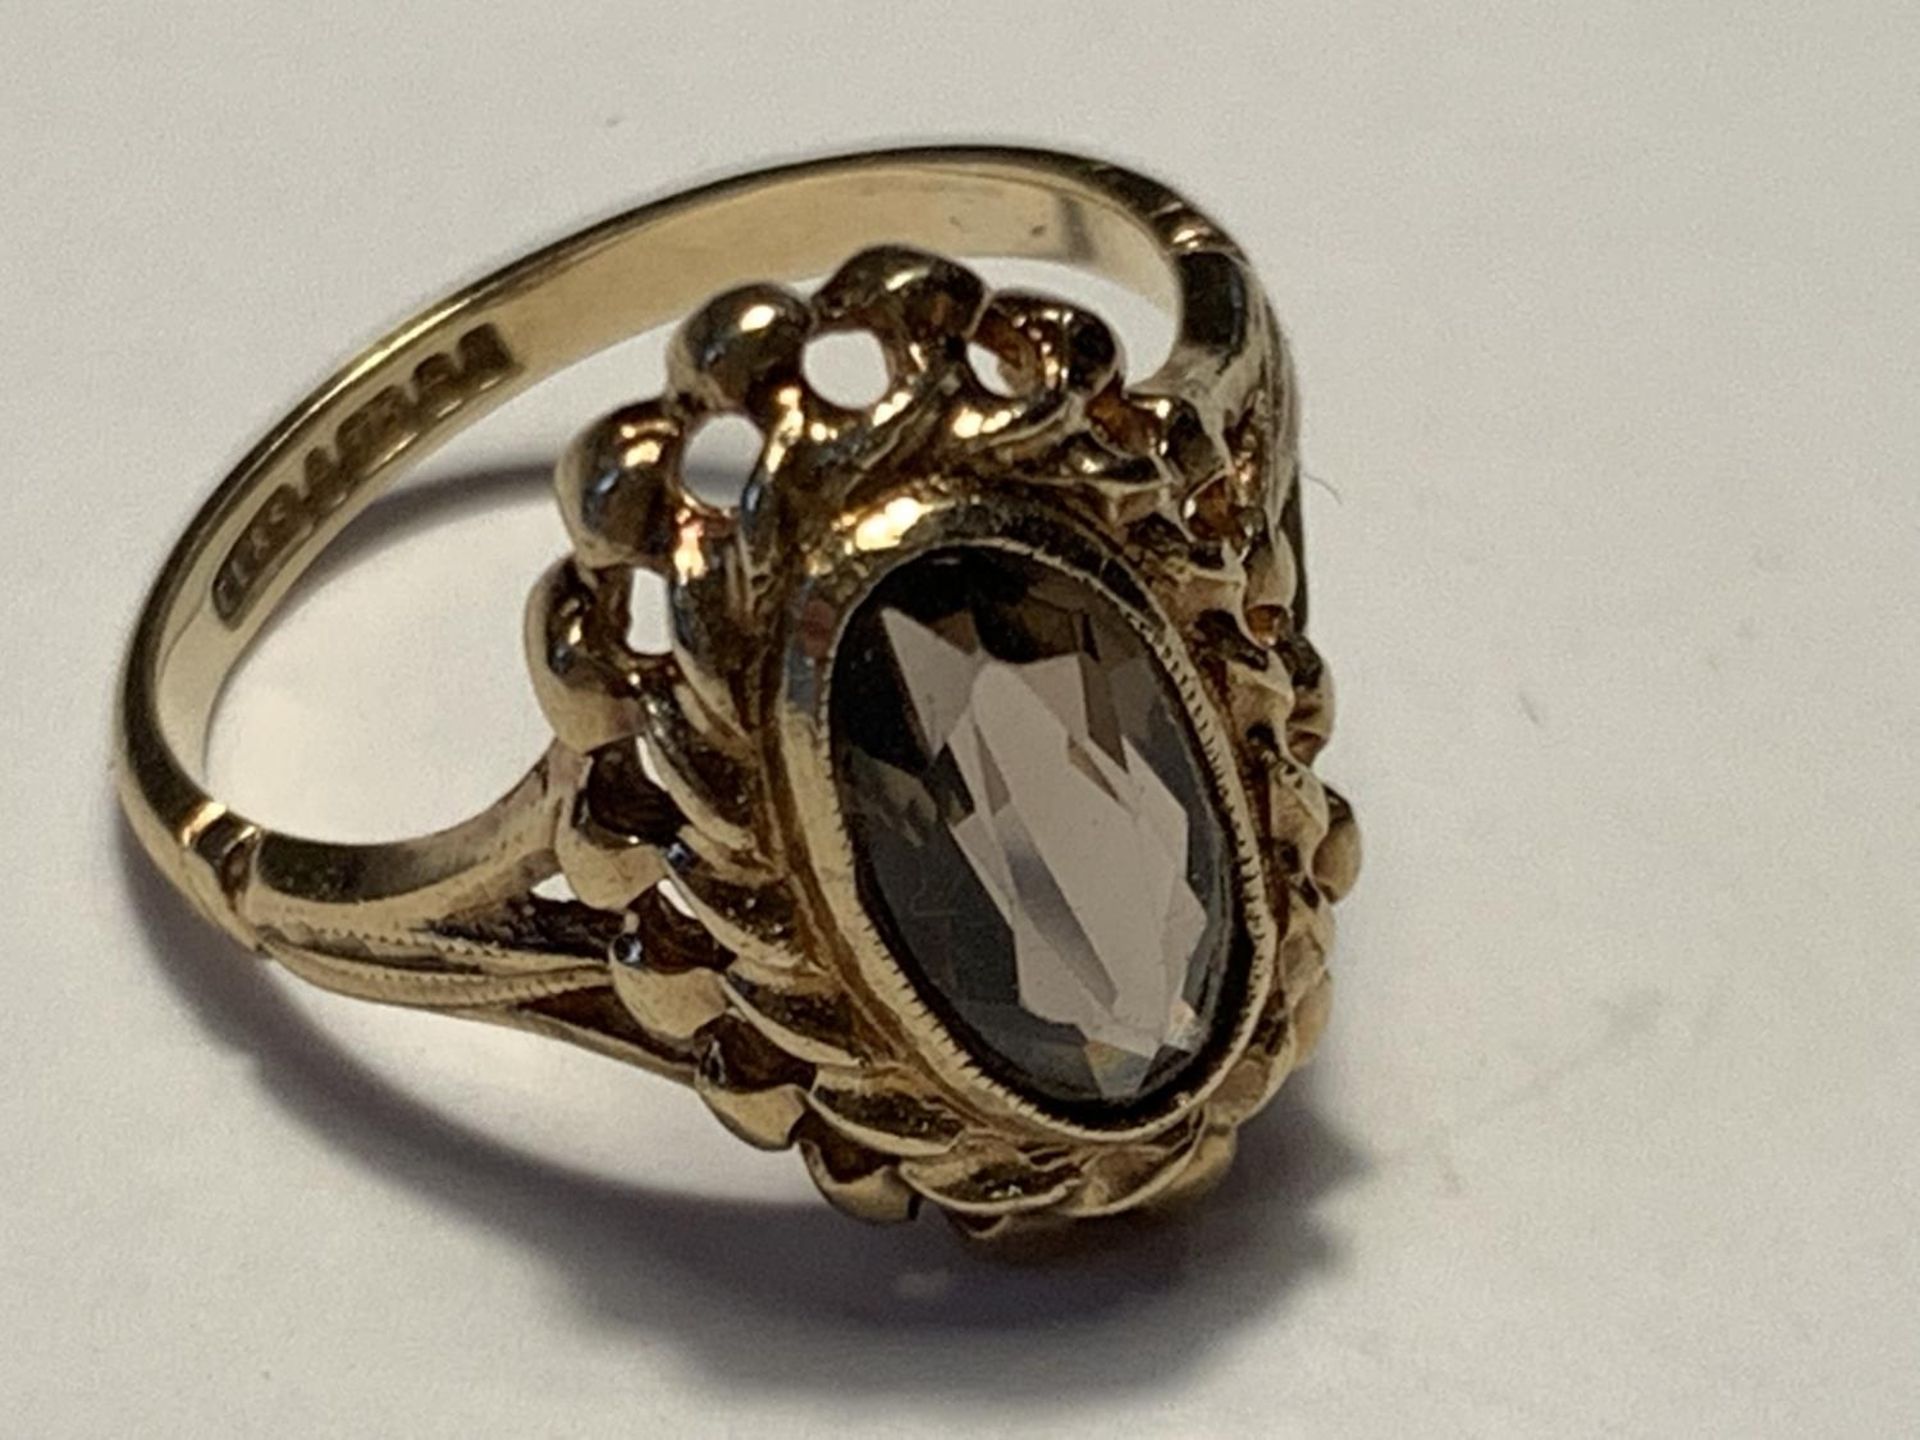 A 9 CARAT GOLD RING WITH AN OVAL SOLITAIRE STONE SIZE K GROSS WEIGHT 2.58 GRAMS